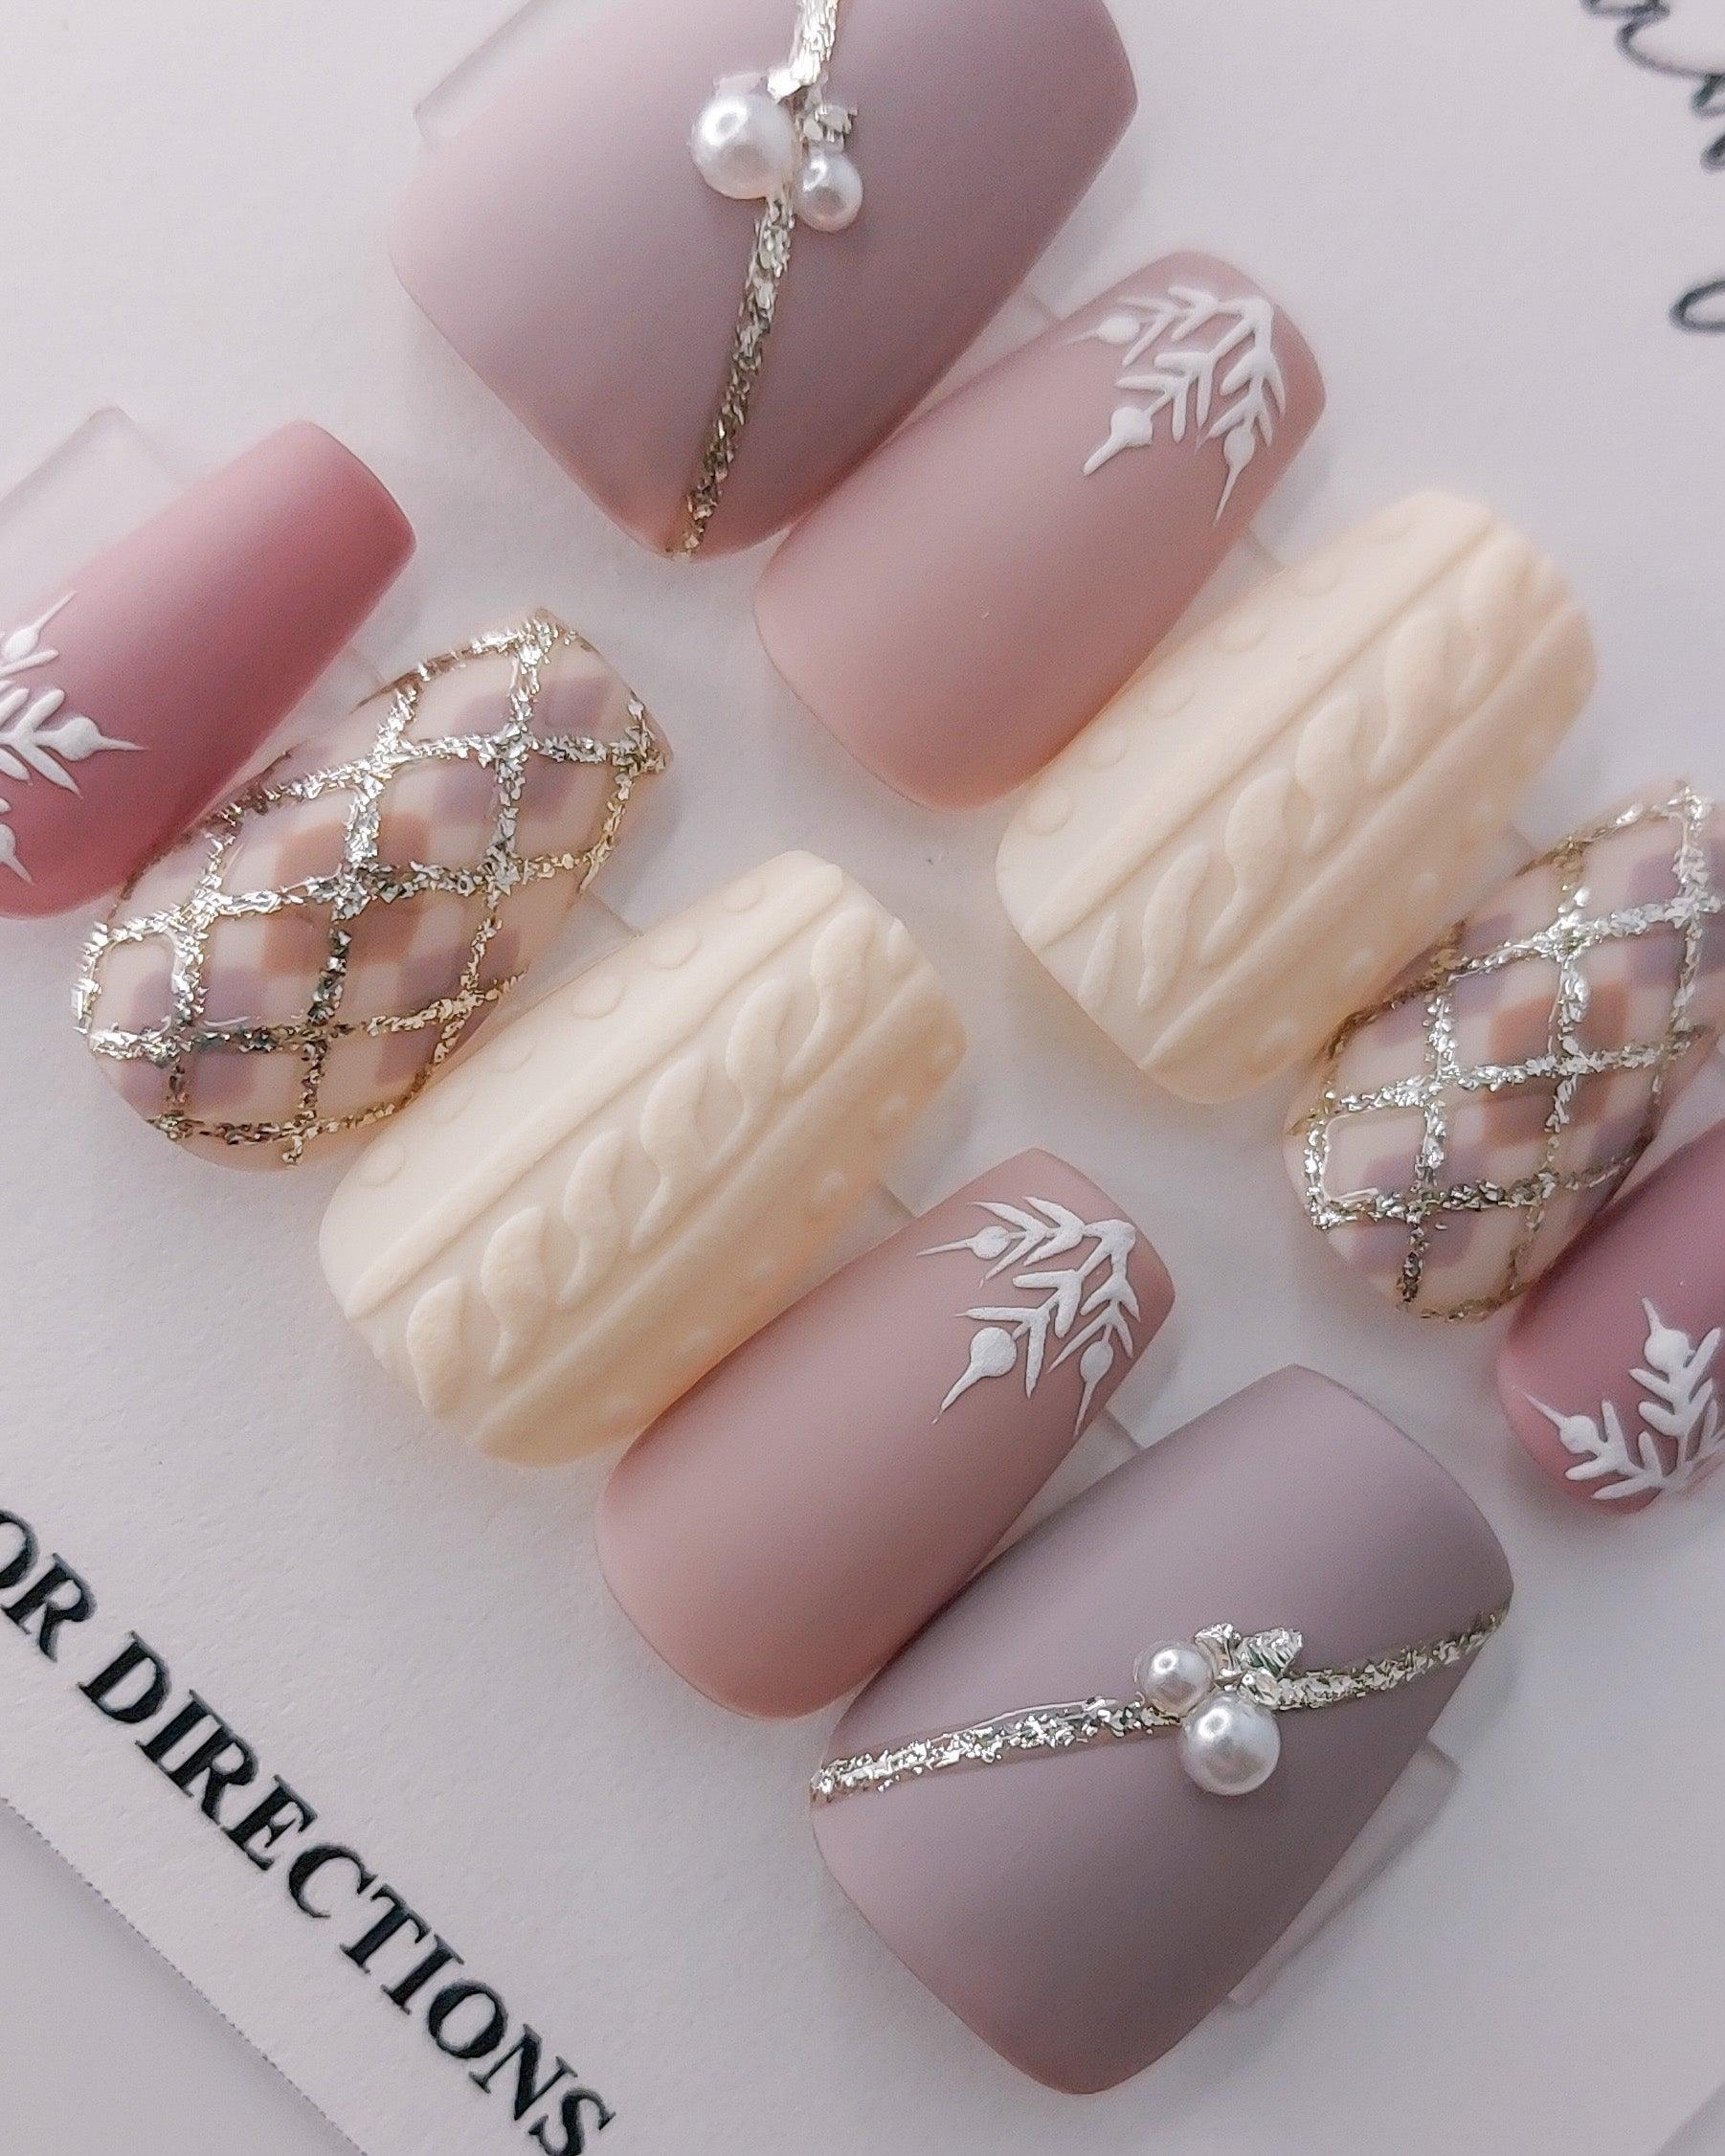 Custom snowflake Press on Nails Design. Light mauve purples with hand drawn white snowflakes, plaid with glitter, 3d sweater nail, silver glitter lines, and pearls.